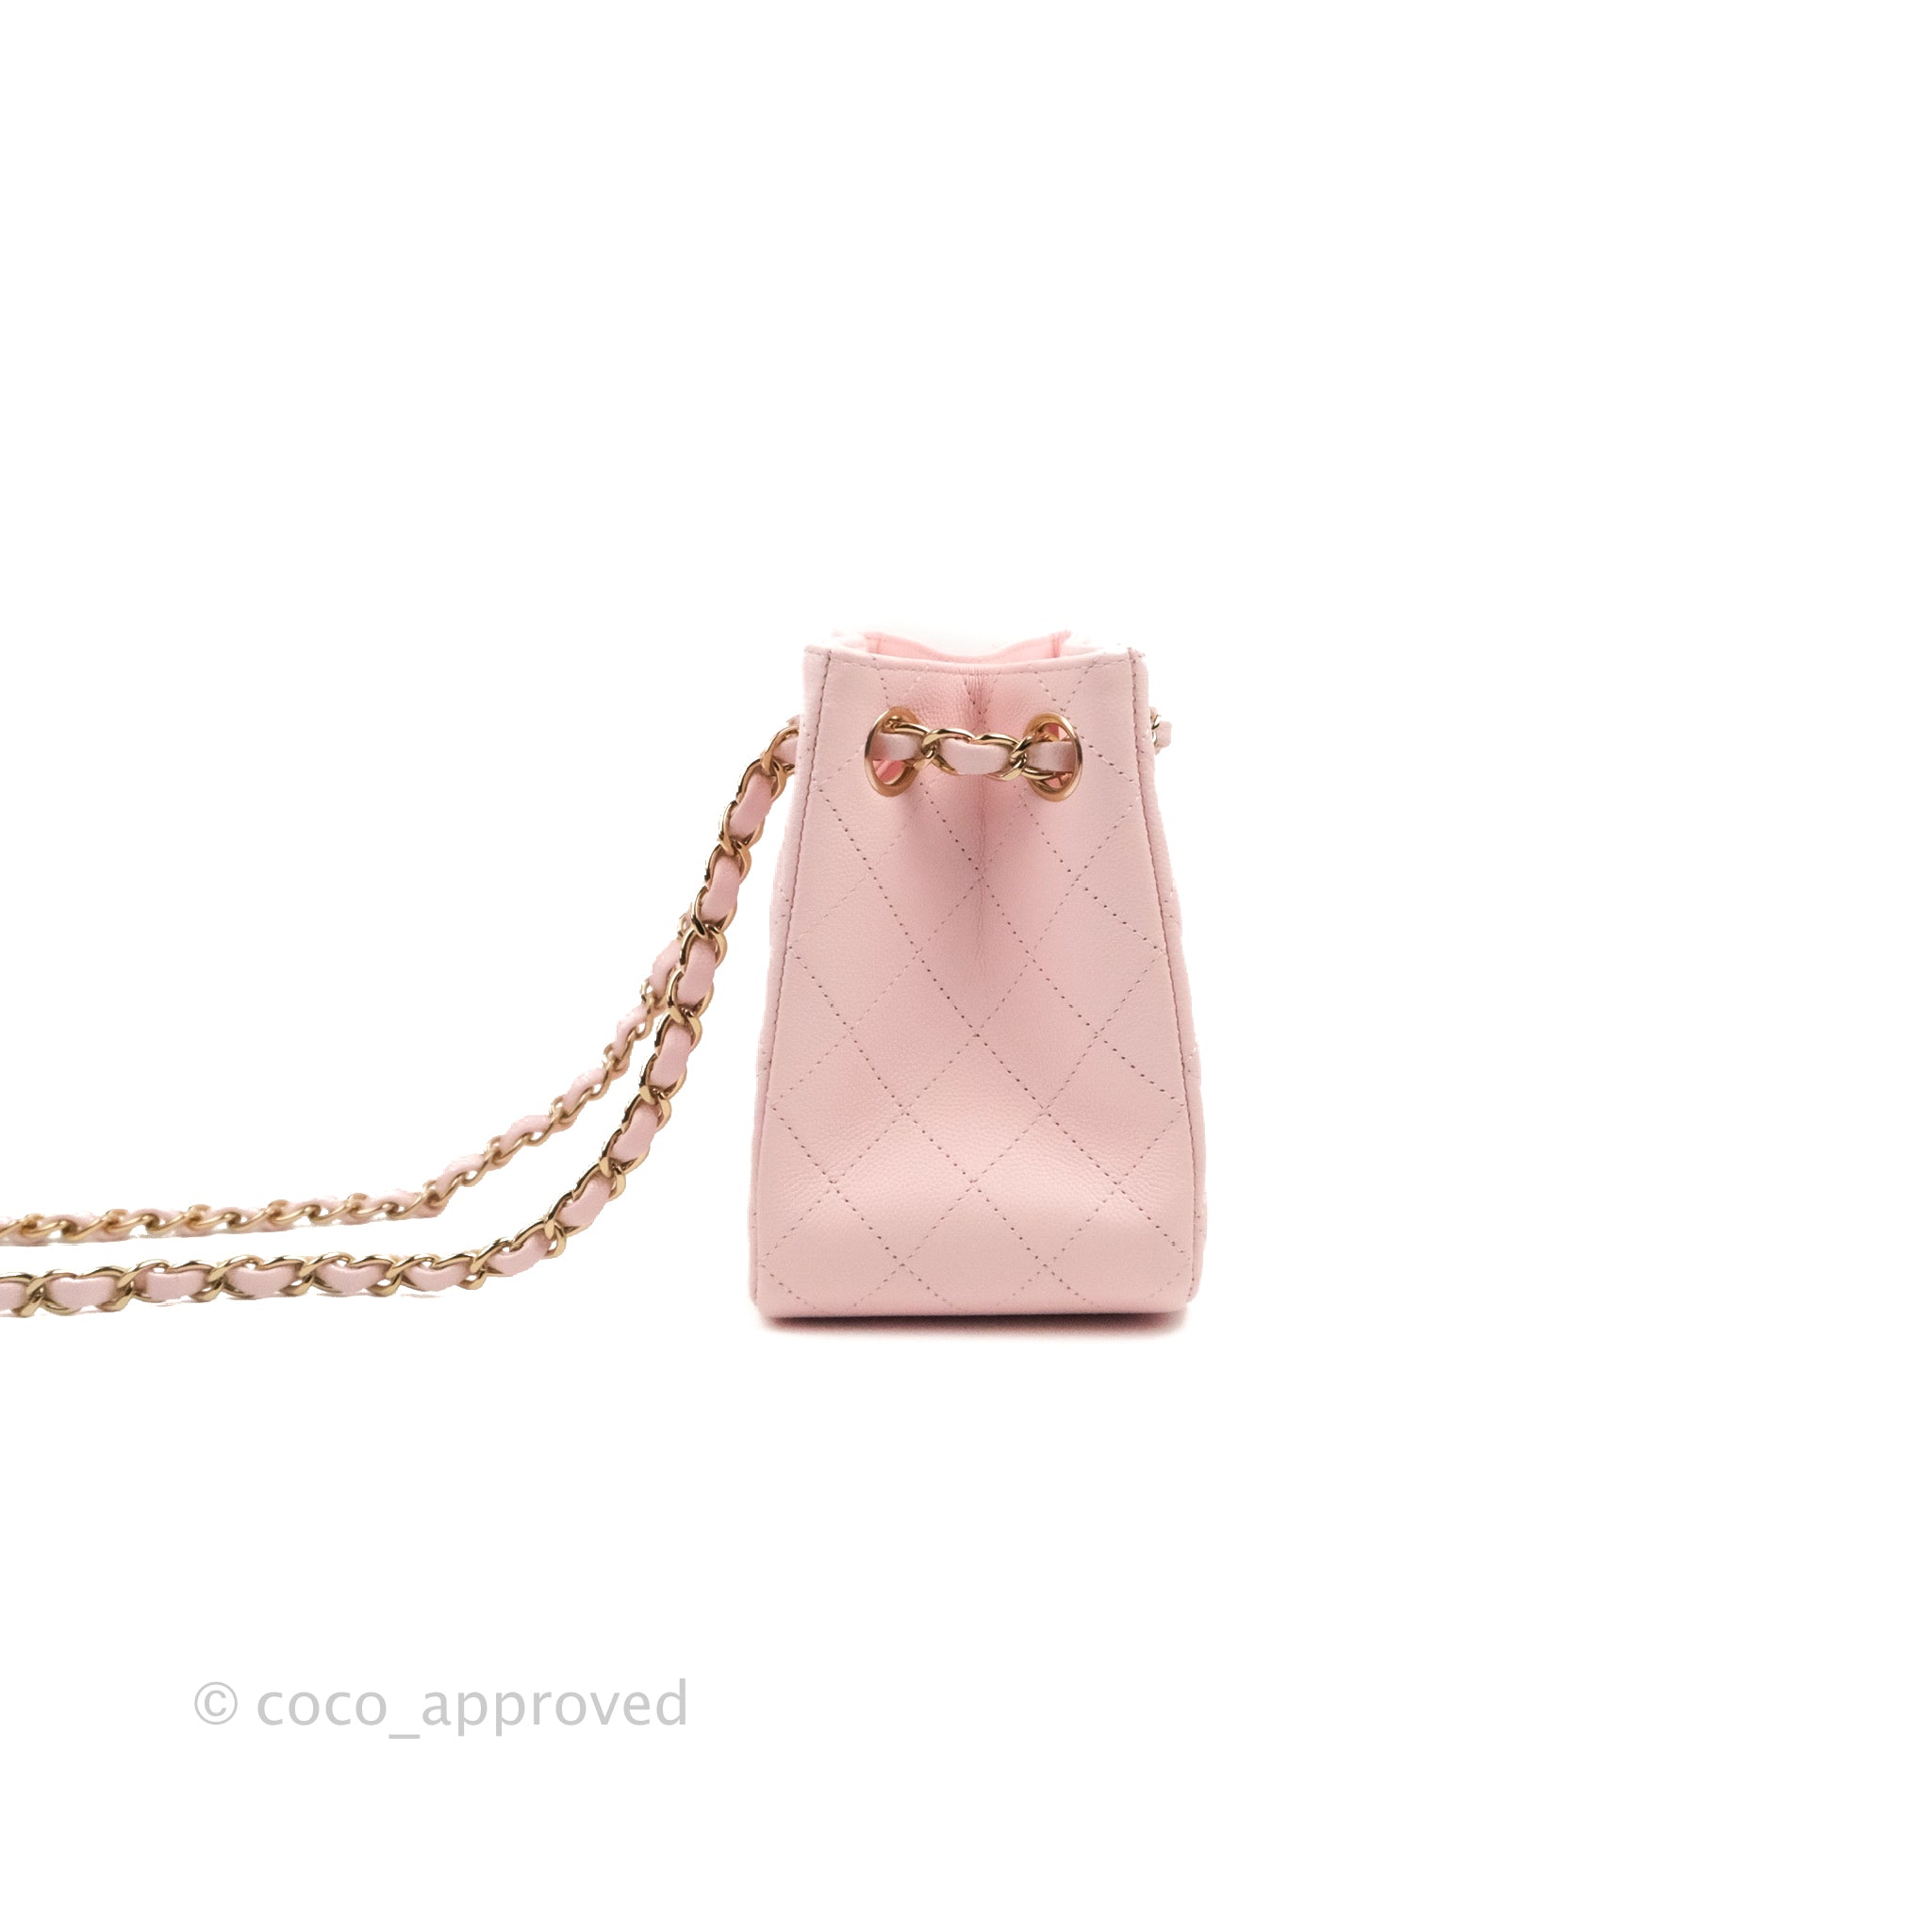 CHANEL Caviar Quilted Mini Bucket Bag Pink 998288